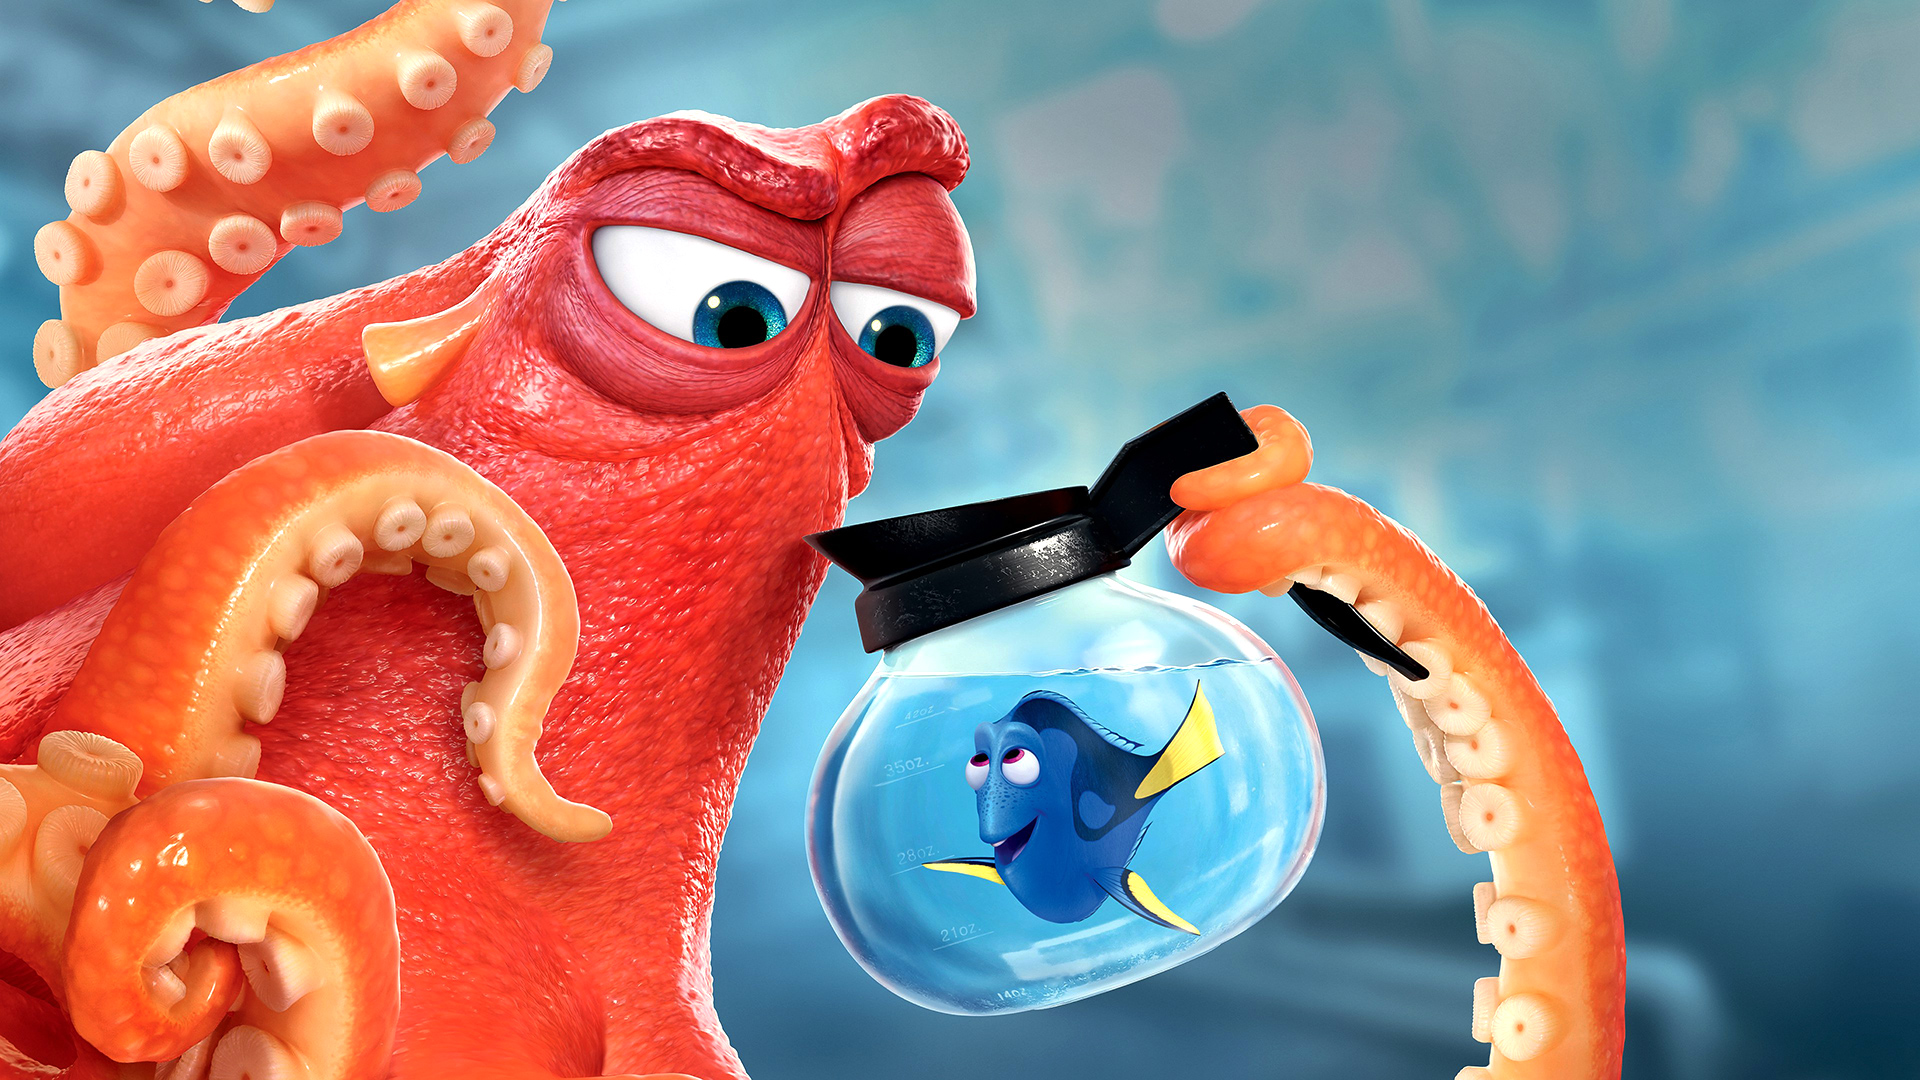 Wallpaper Finding dory animated movie, fish, octopus